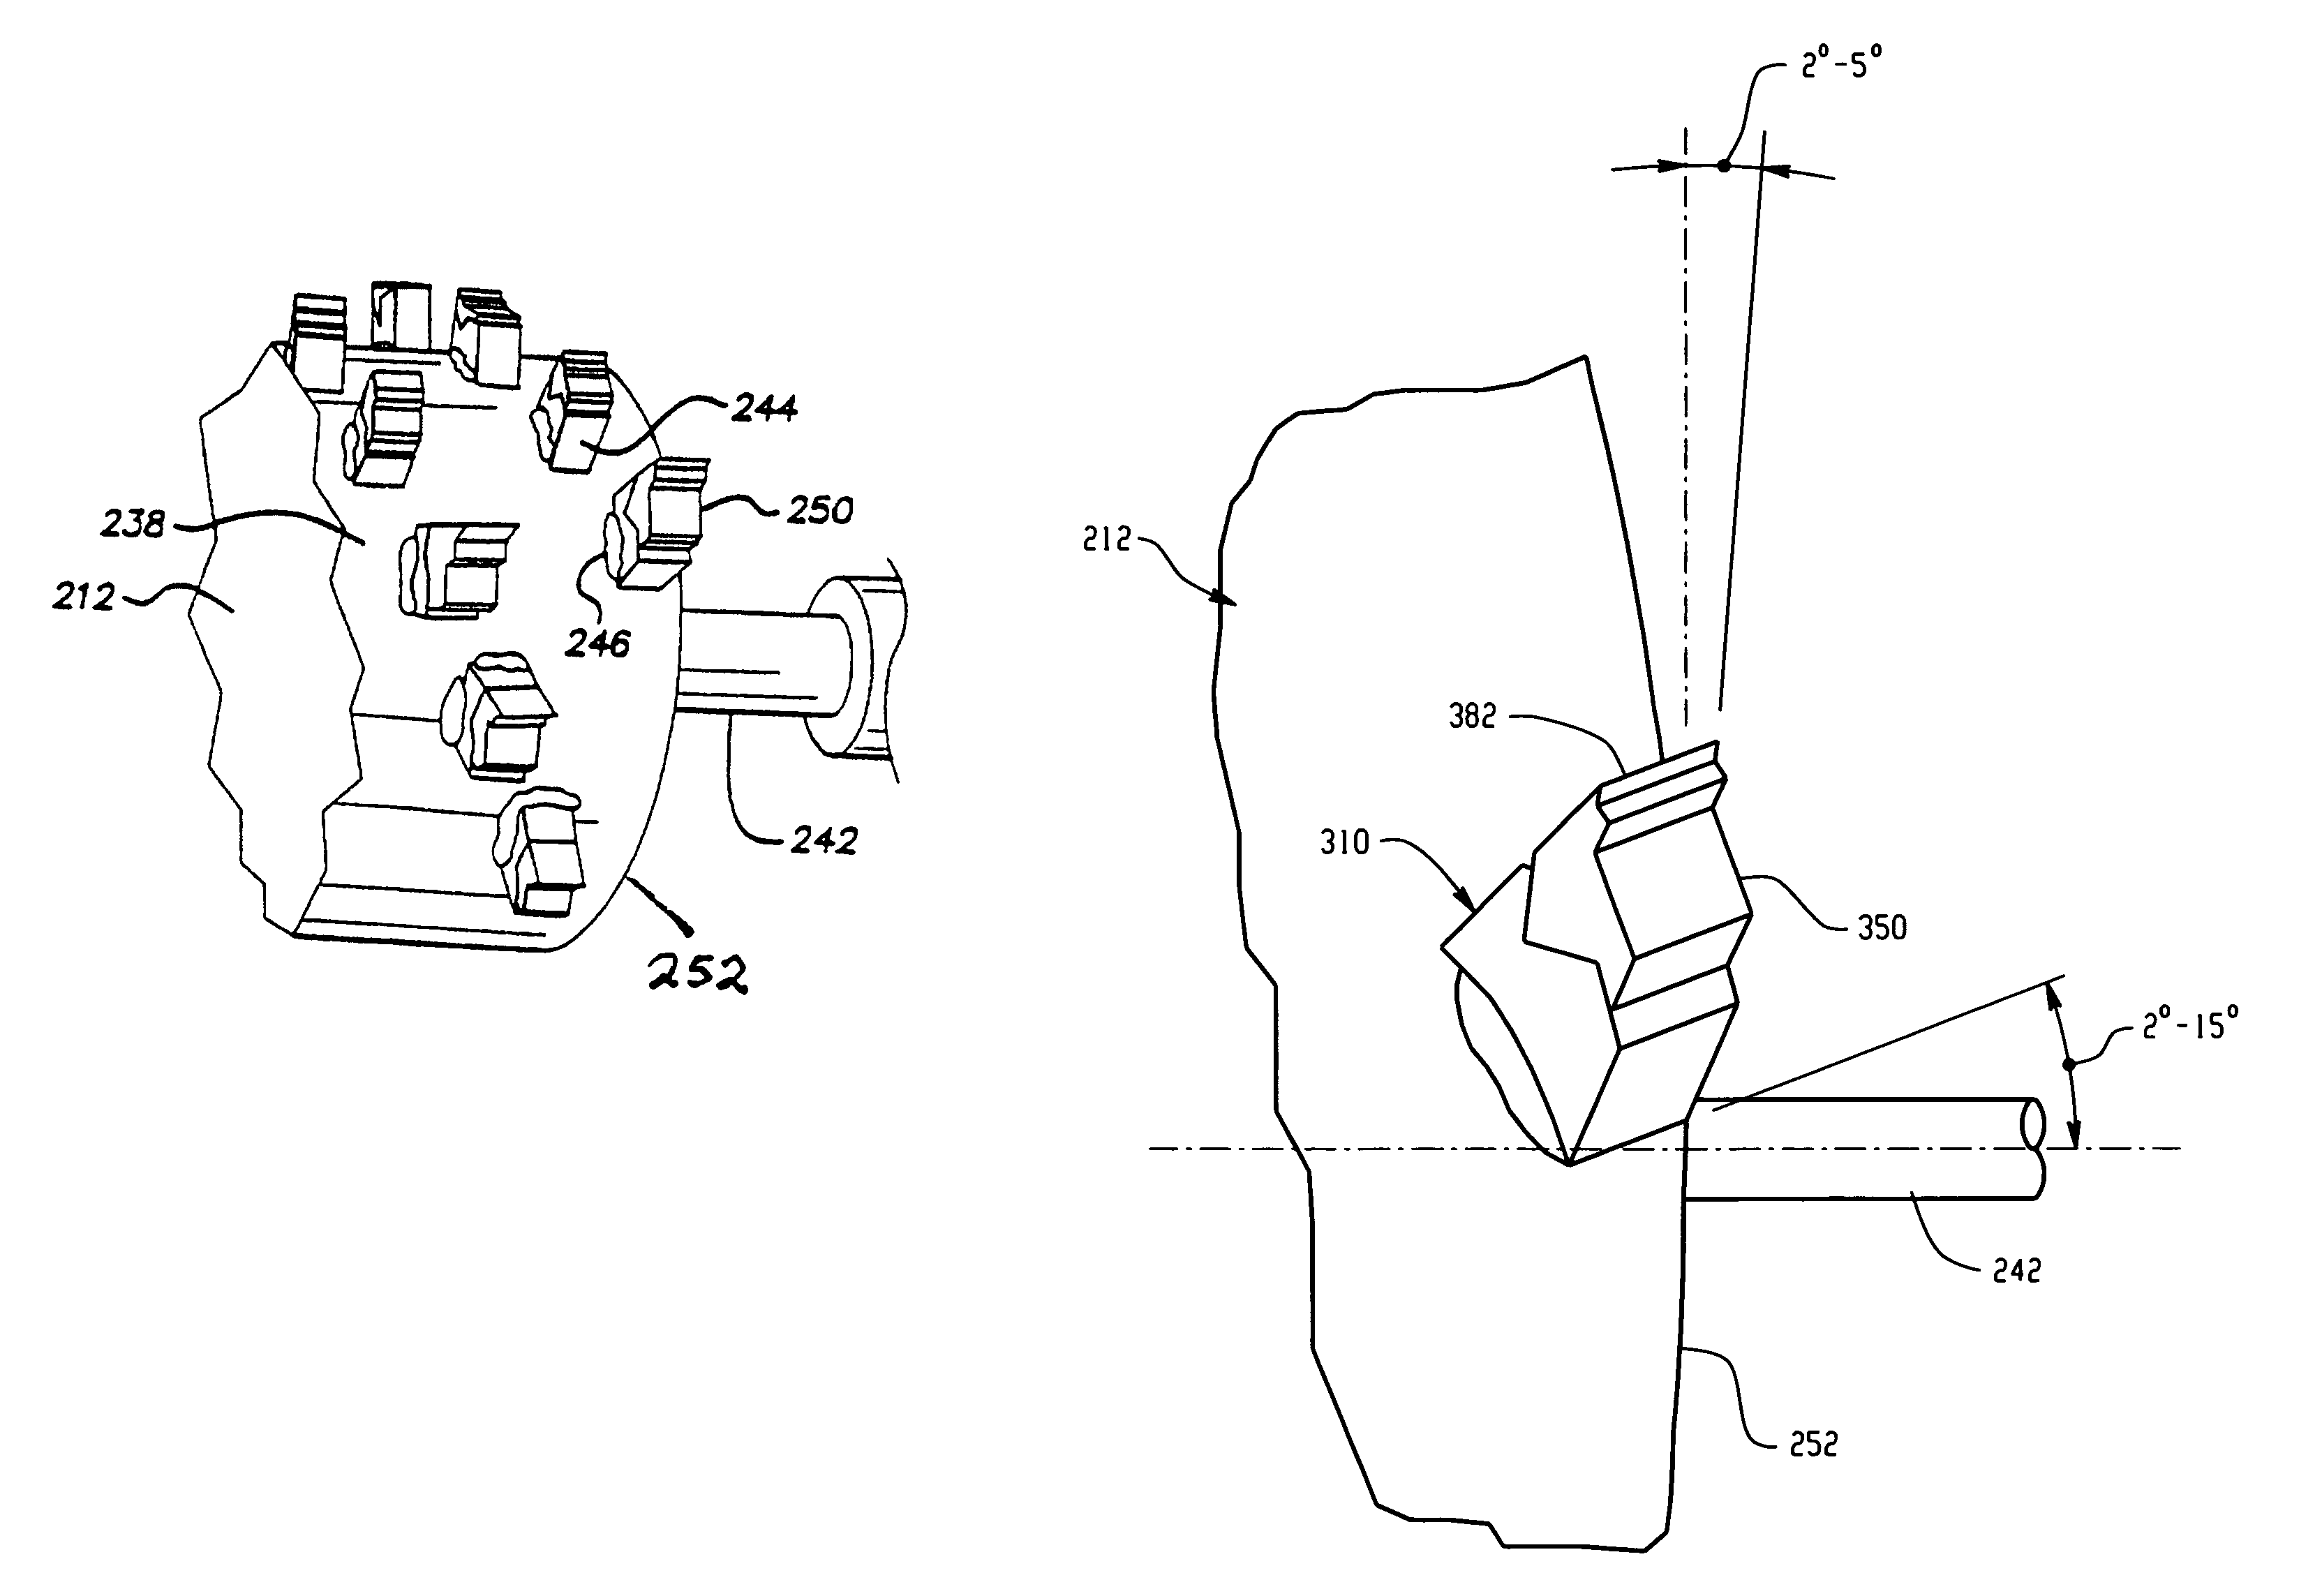 Shredding apparatus and method of clearing land